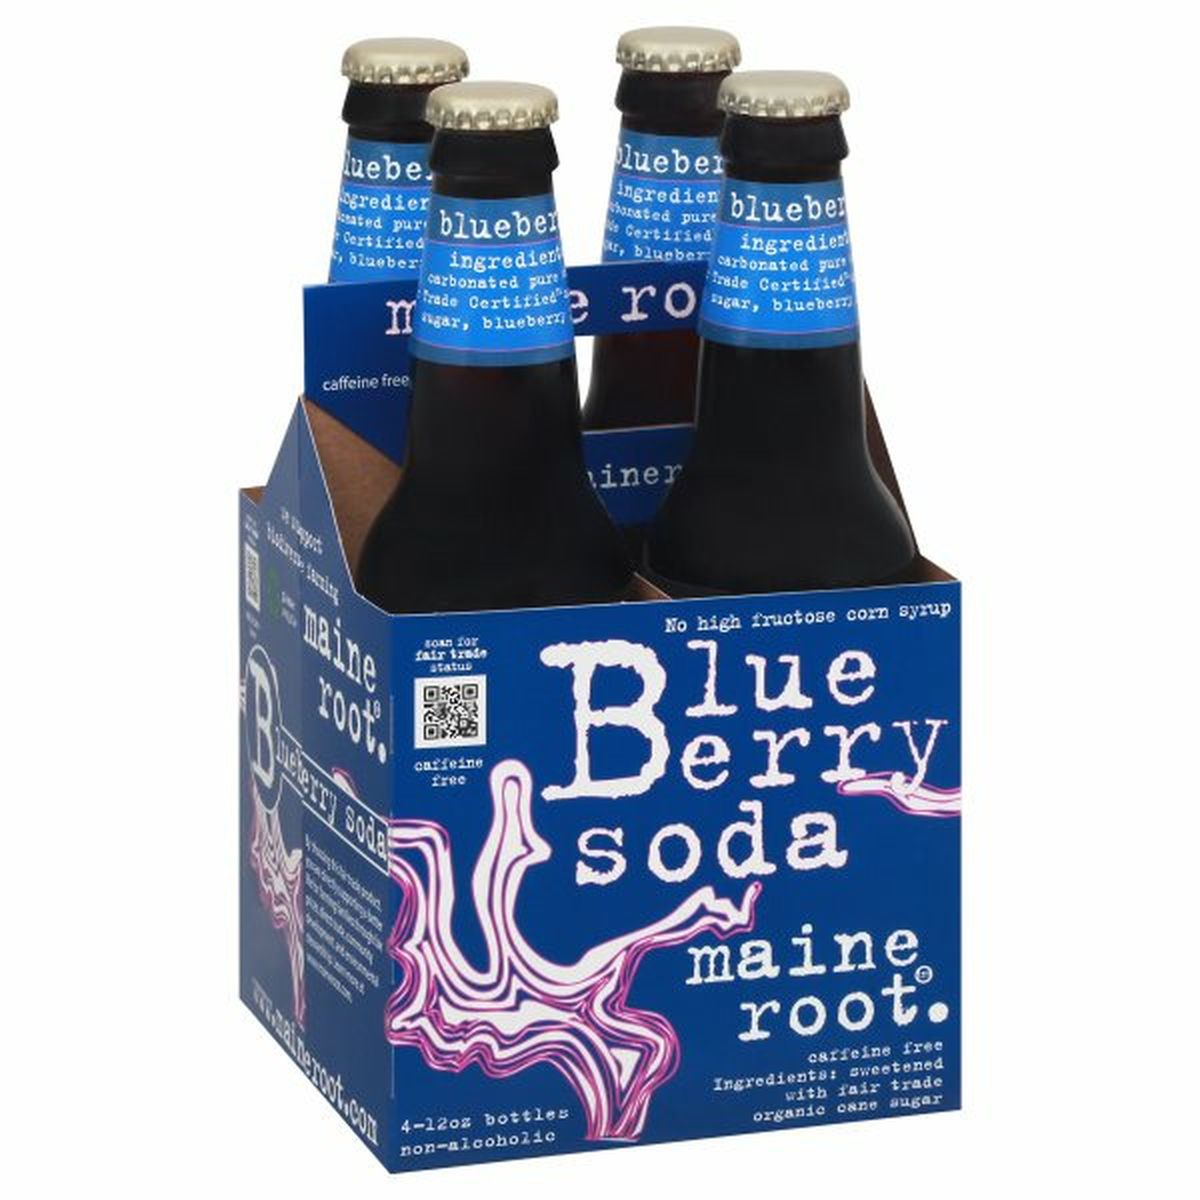 Calories in Maine Root Soda, Blueberry